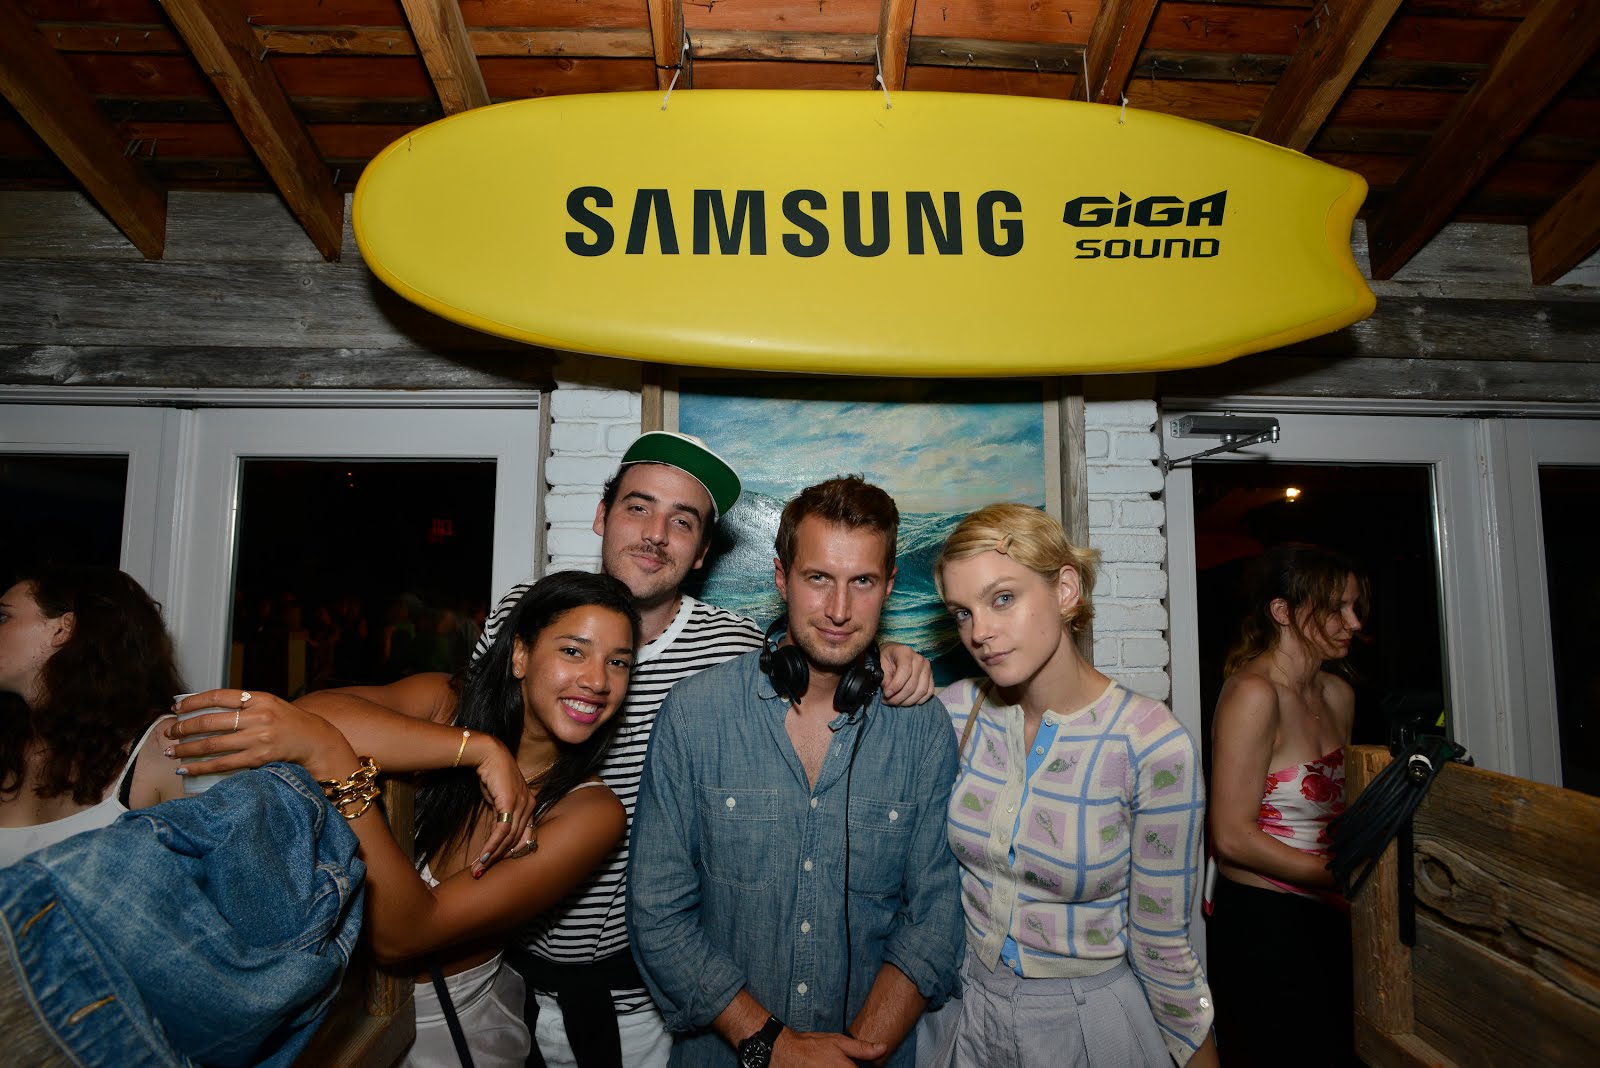 Hannah Bronfman and beau, Brendan Fallis, in the DJ booth showing model, Jessica Stam